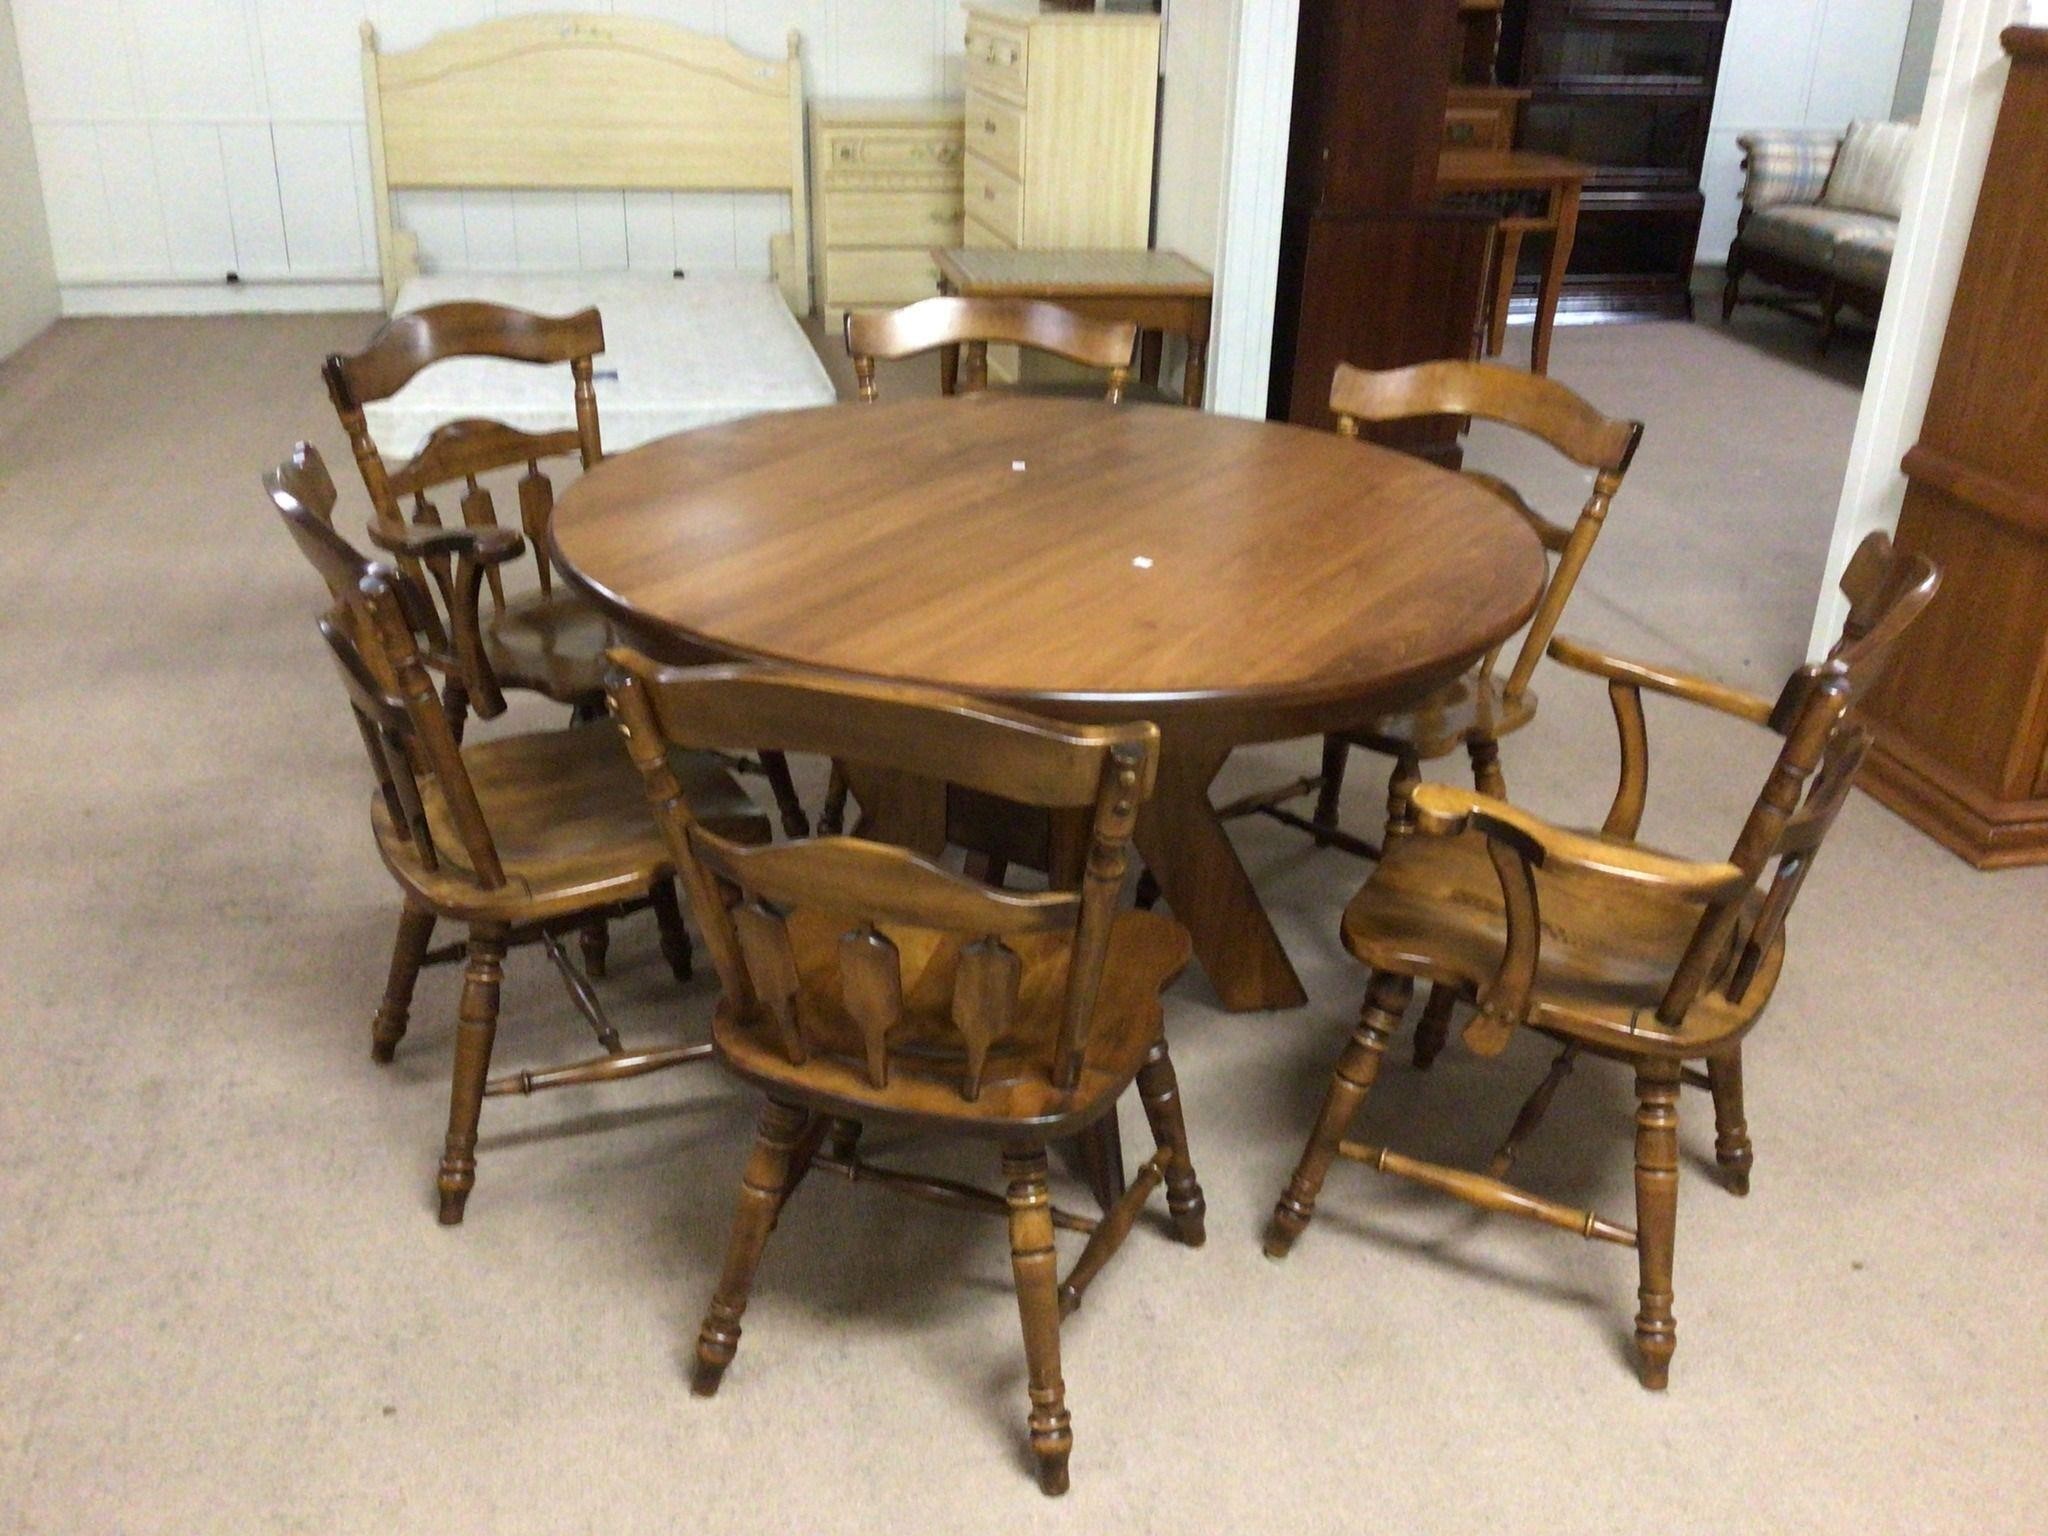 Temple Stewart Dining Chairs and Craftsman Table